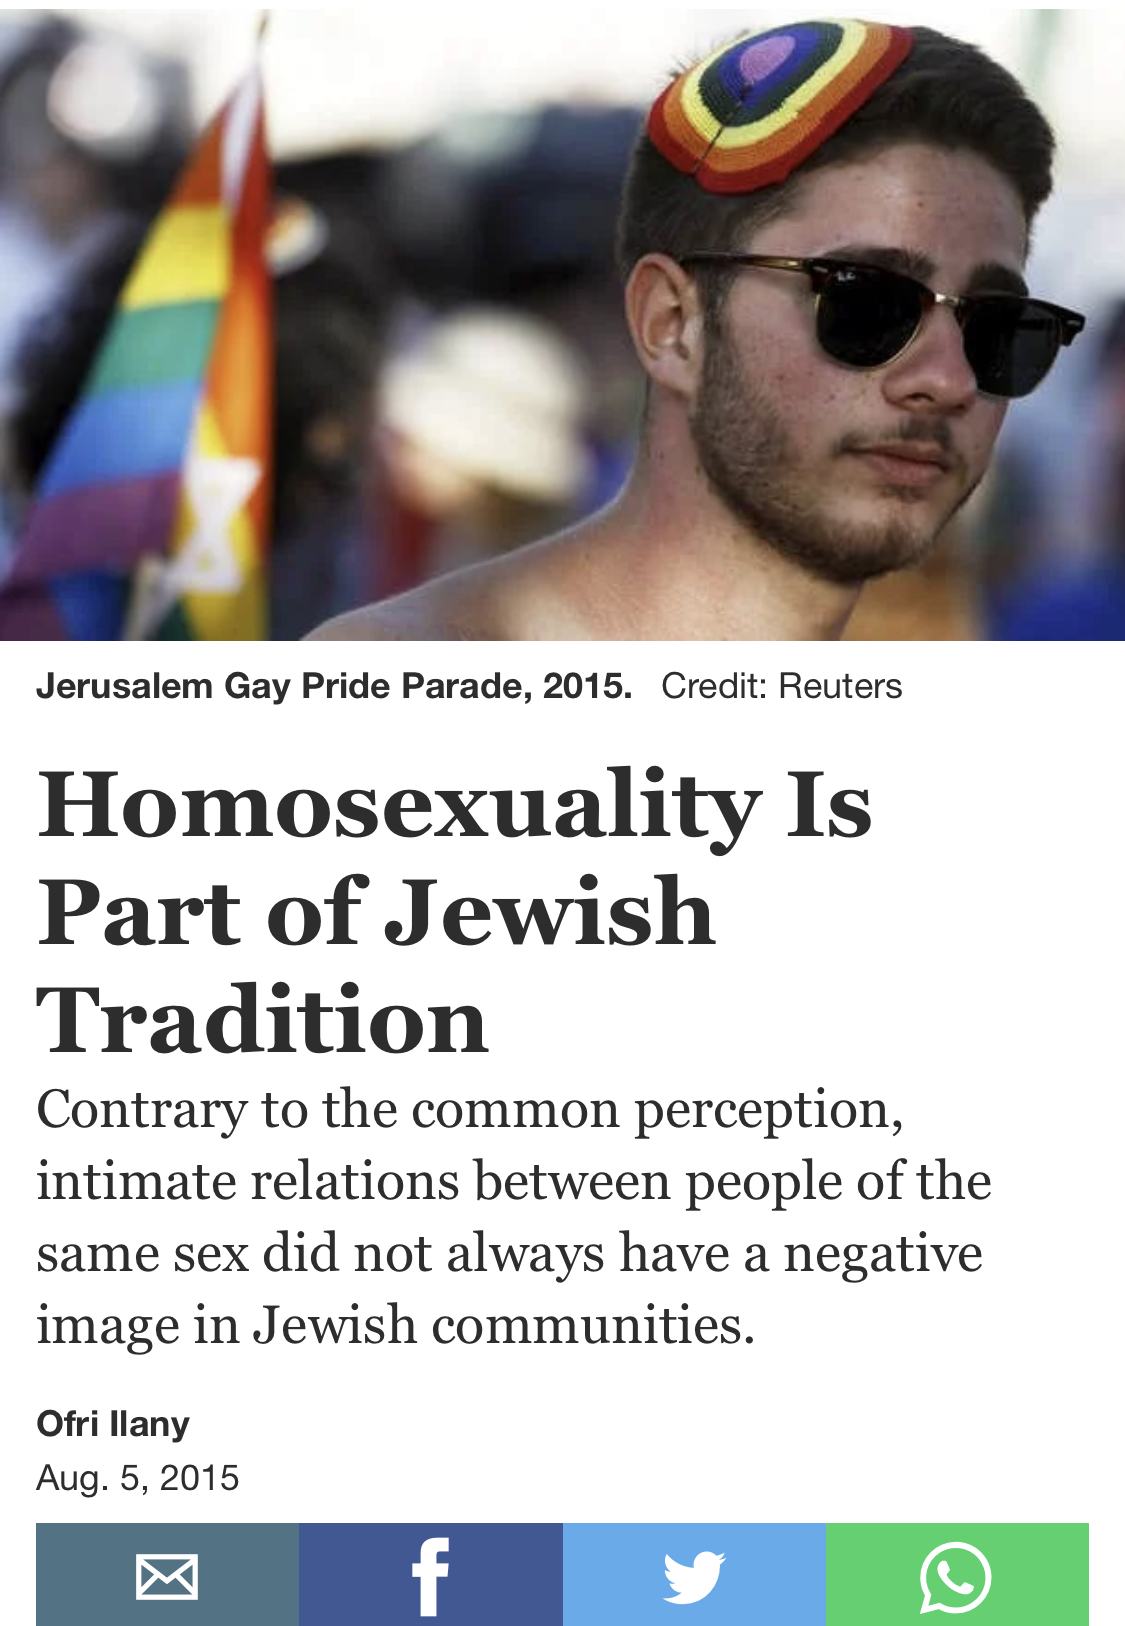 Obrázek Laws against homosexuality are antisemitic